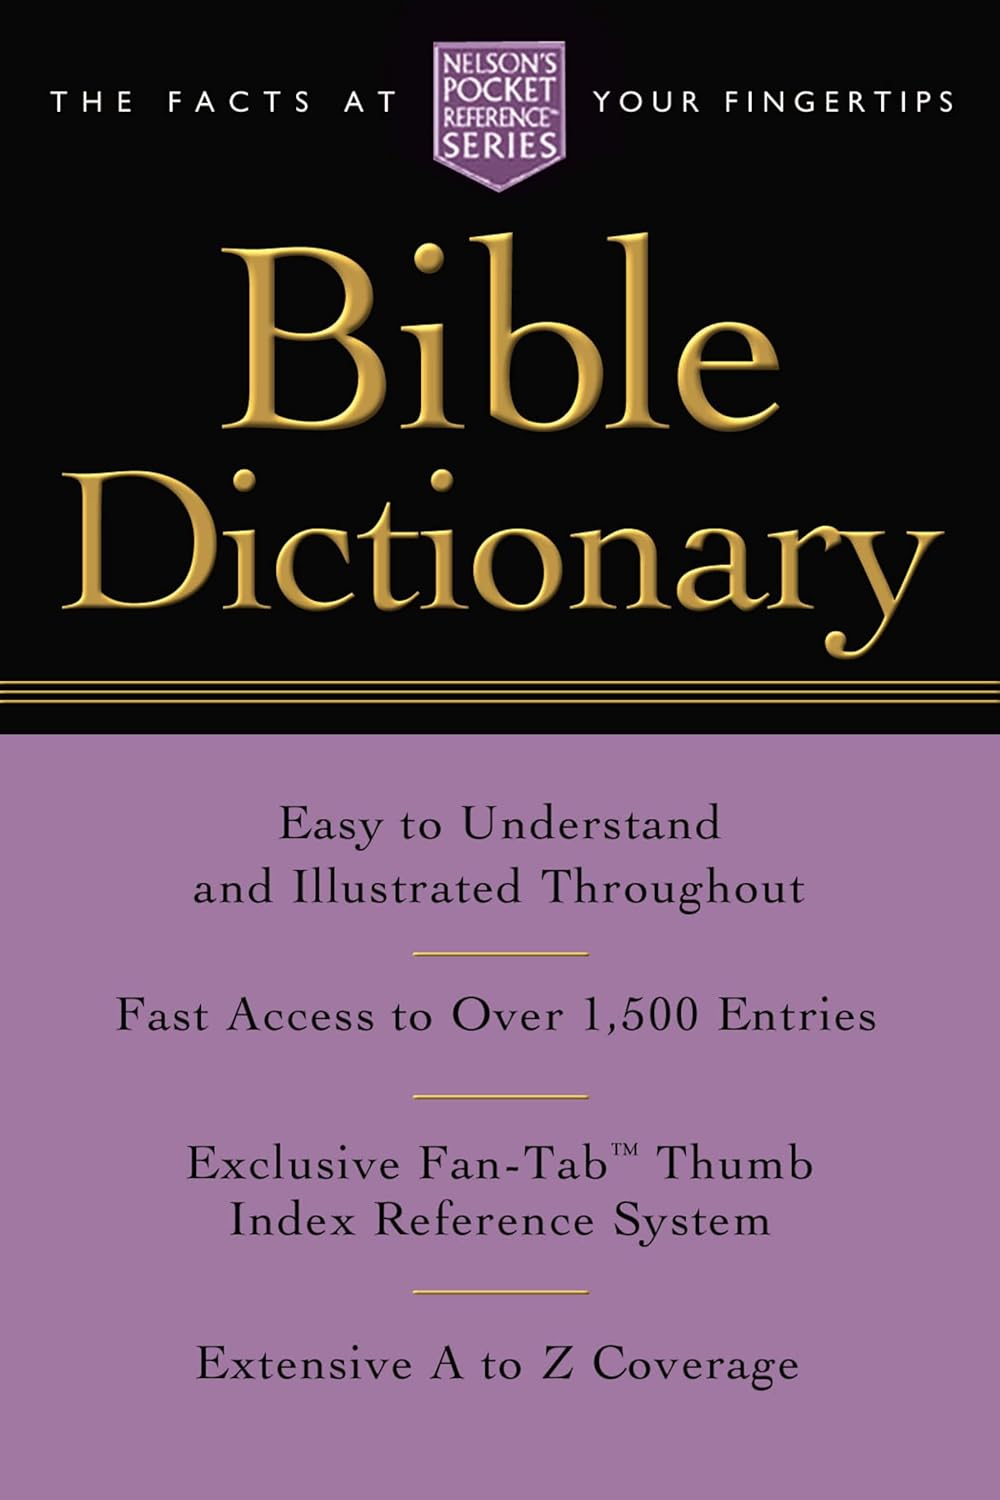 Pocket Bible Dictionary - Nelson's Pocket Reference Series - CA Corrections Bookstore